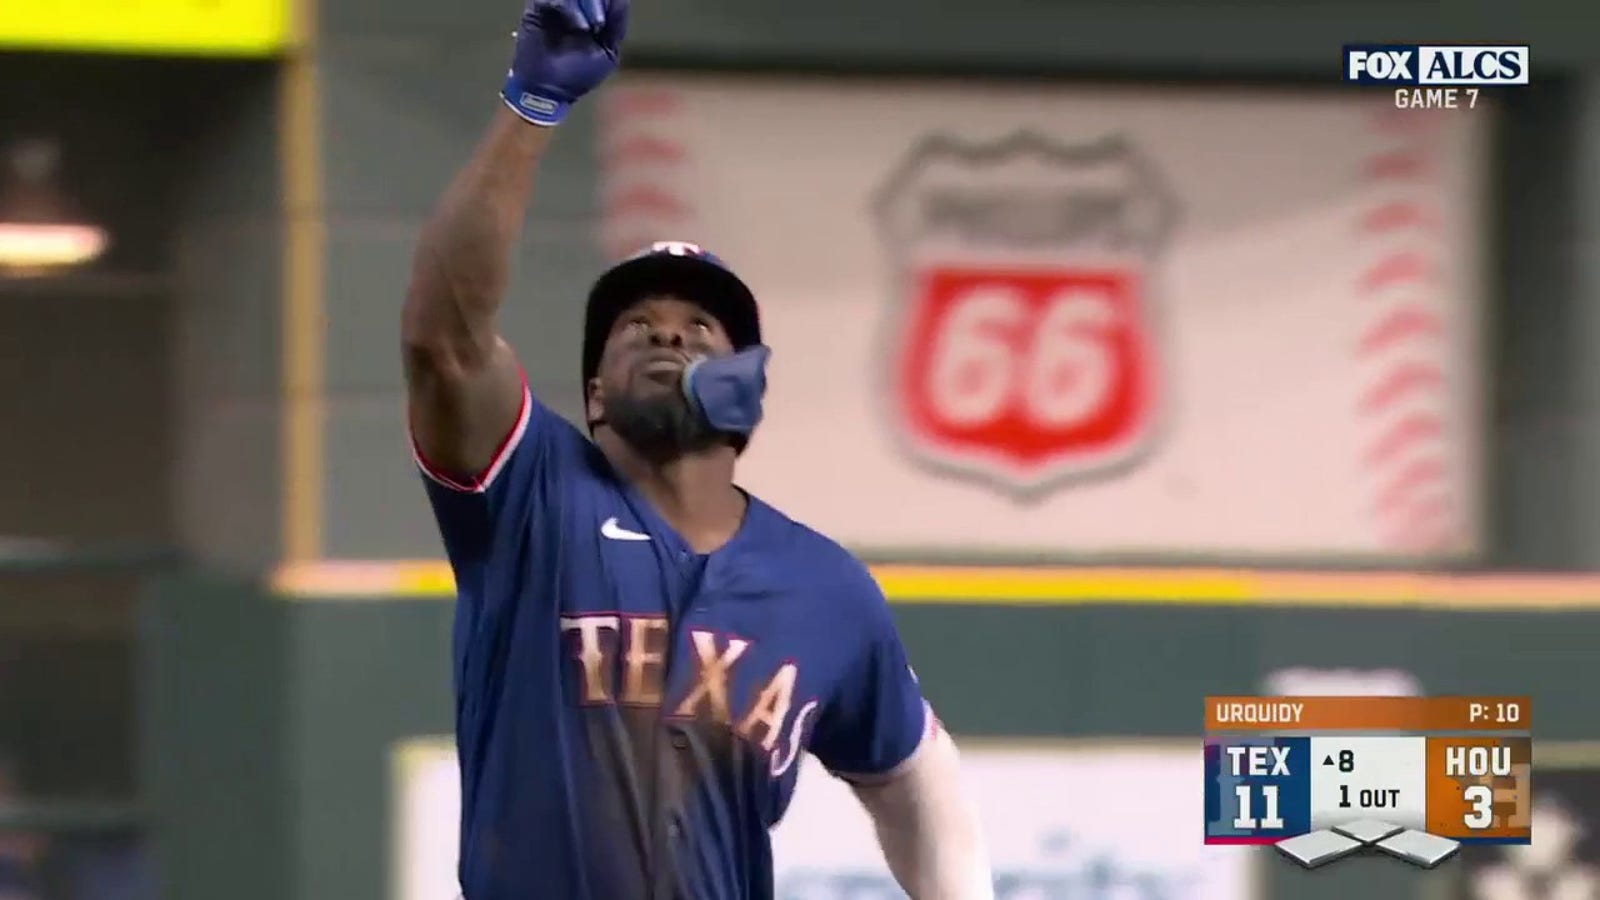 Adolis Garcia hit his second home run of the game to extend the Rangers' lead over the Astros